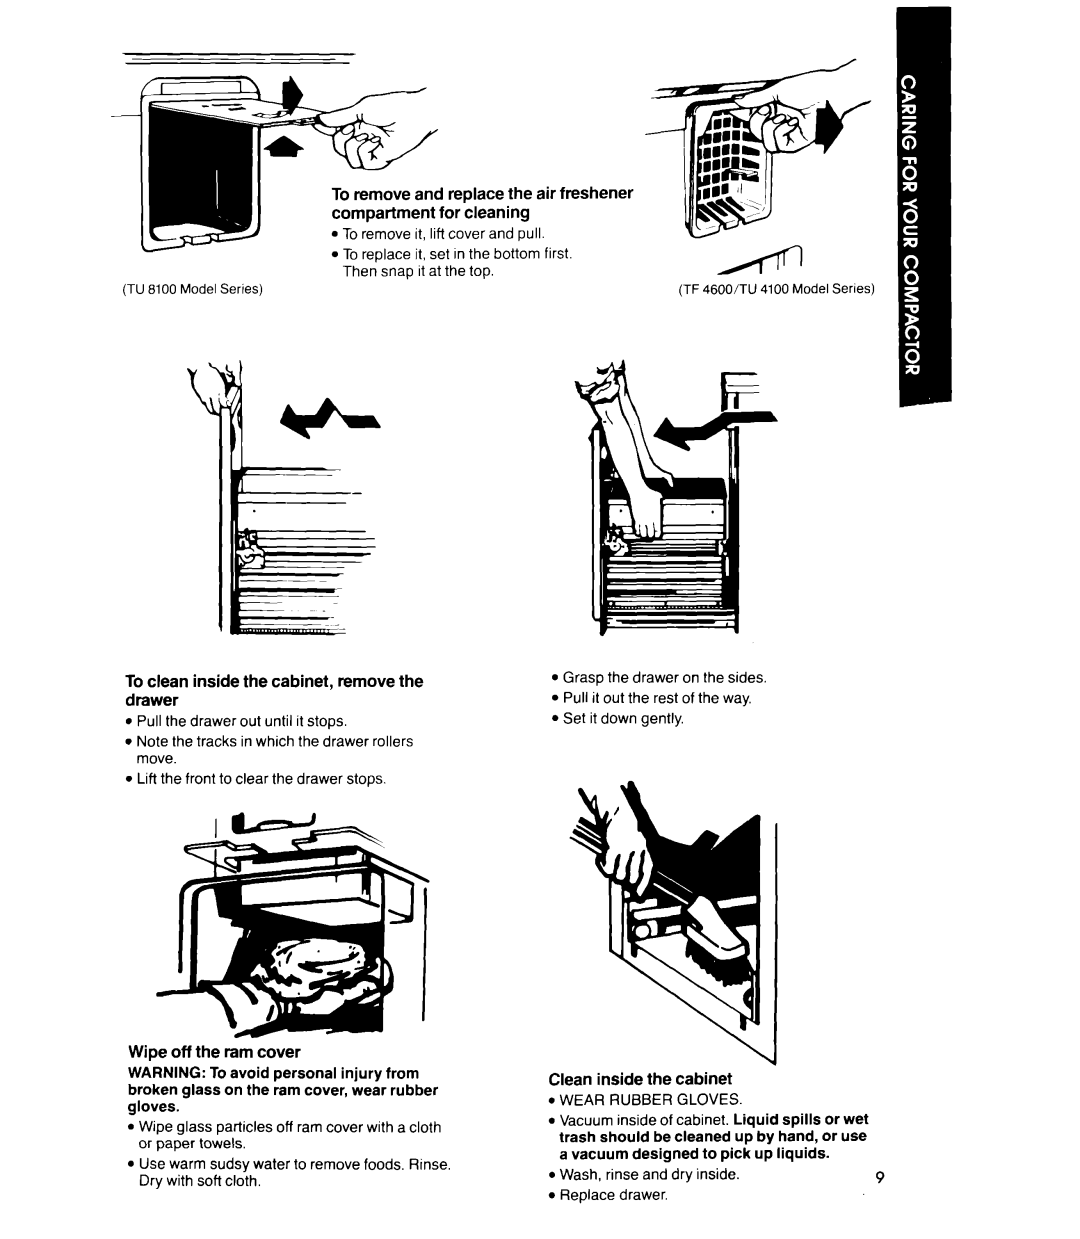 Whirlpool TU 4100 manual To clean inside the cabinet, remove the drawer, Wipe off the ram cover, Clean inside the cabinet 